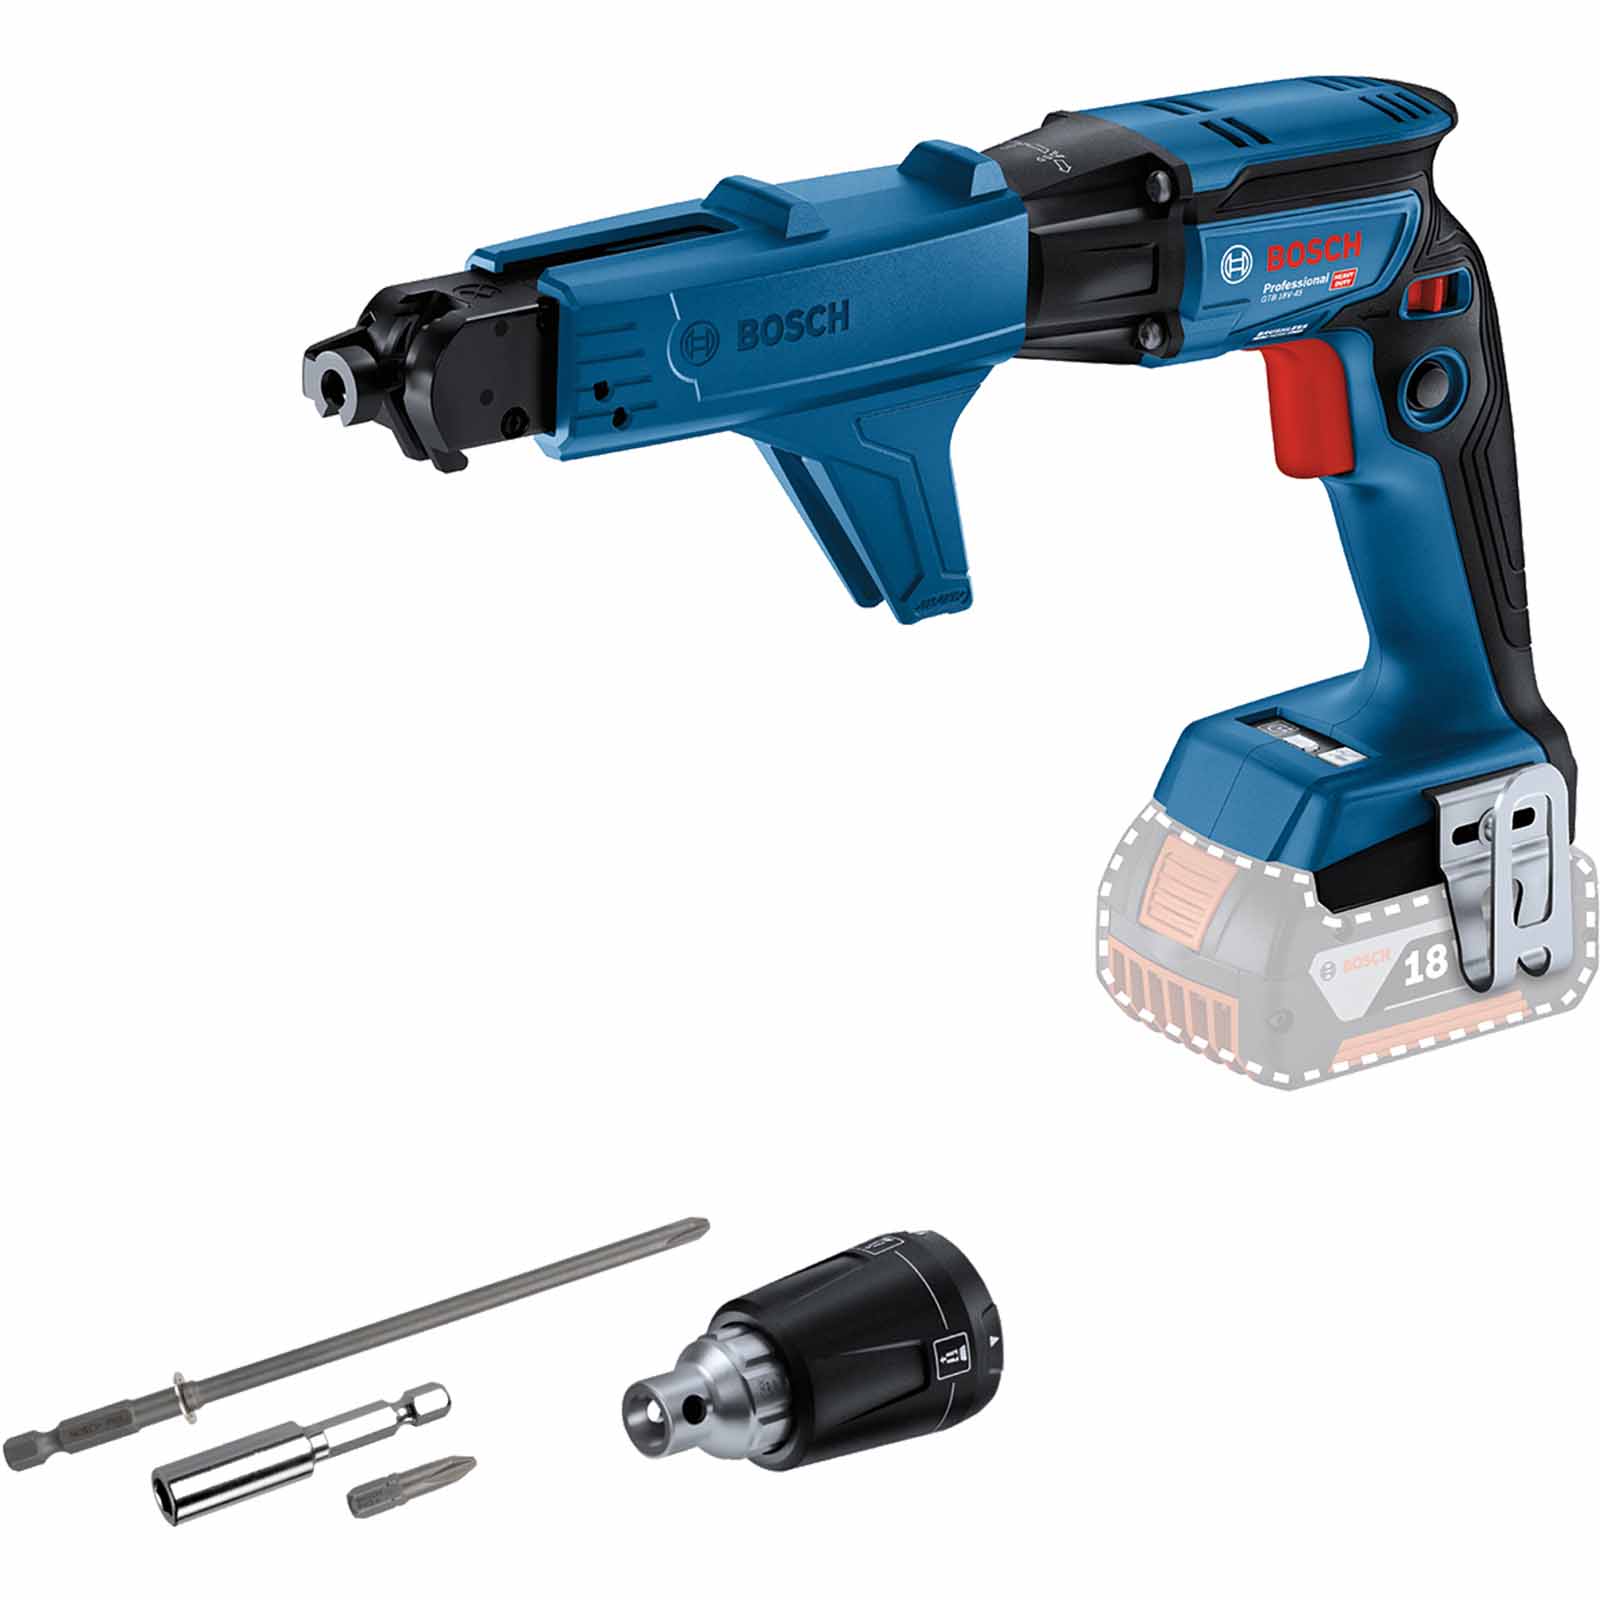 Bosch GTB 18V-45 18v Cordless Brushless Drywall Screwdriver No Batteries No Charger No Case with Accessories